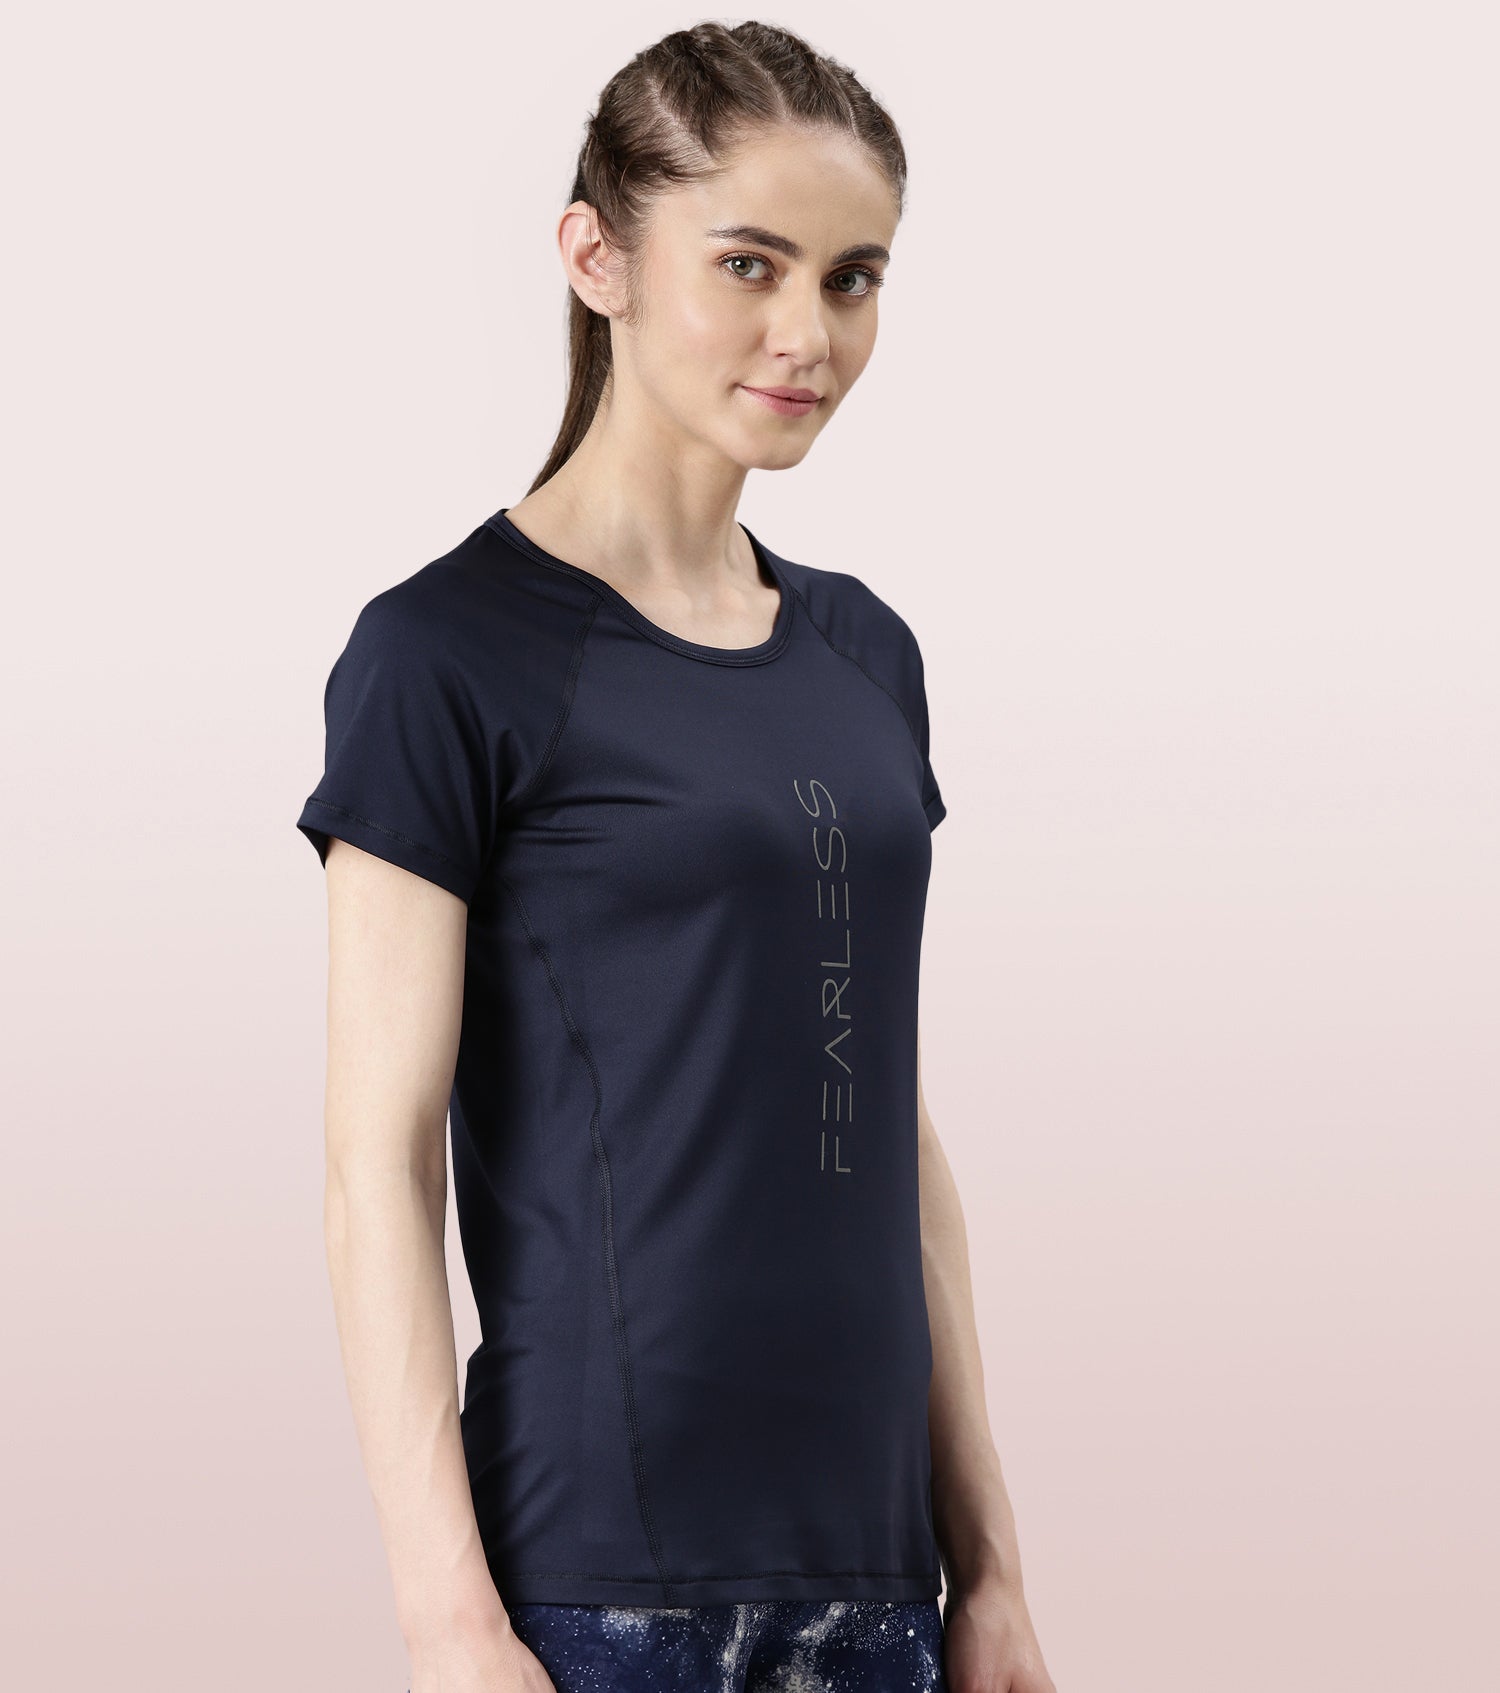 Buy Enamor Athleisure Women's Raglan Sleeves Scoop Neck Slim Fit Quick Dry  4 Way Stretch Antimicrobial Active Tee with Reflective Graphic-  E089(E089-Jet Black-XL) at